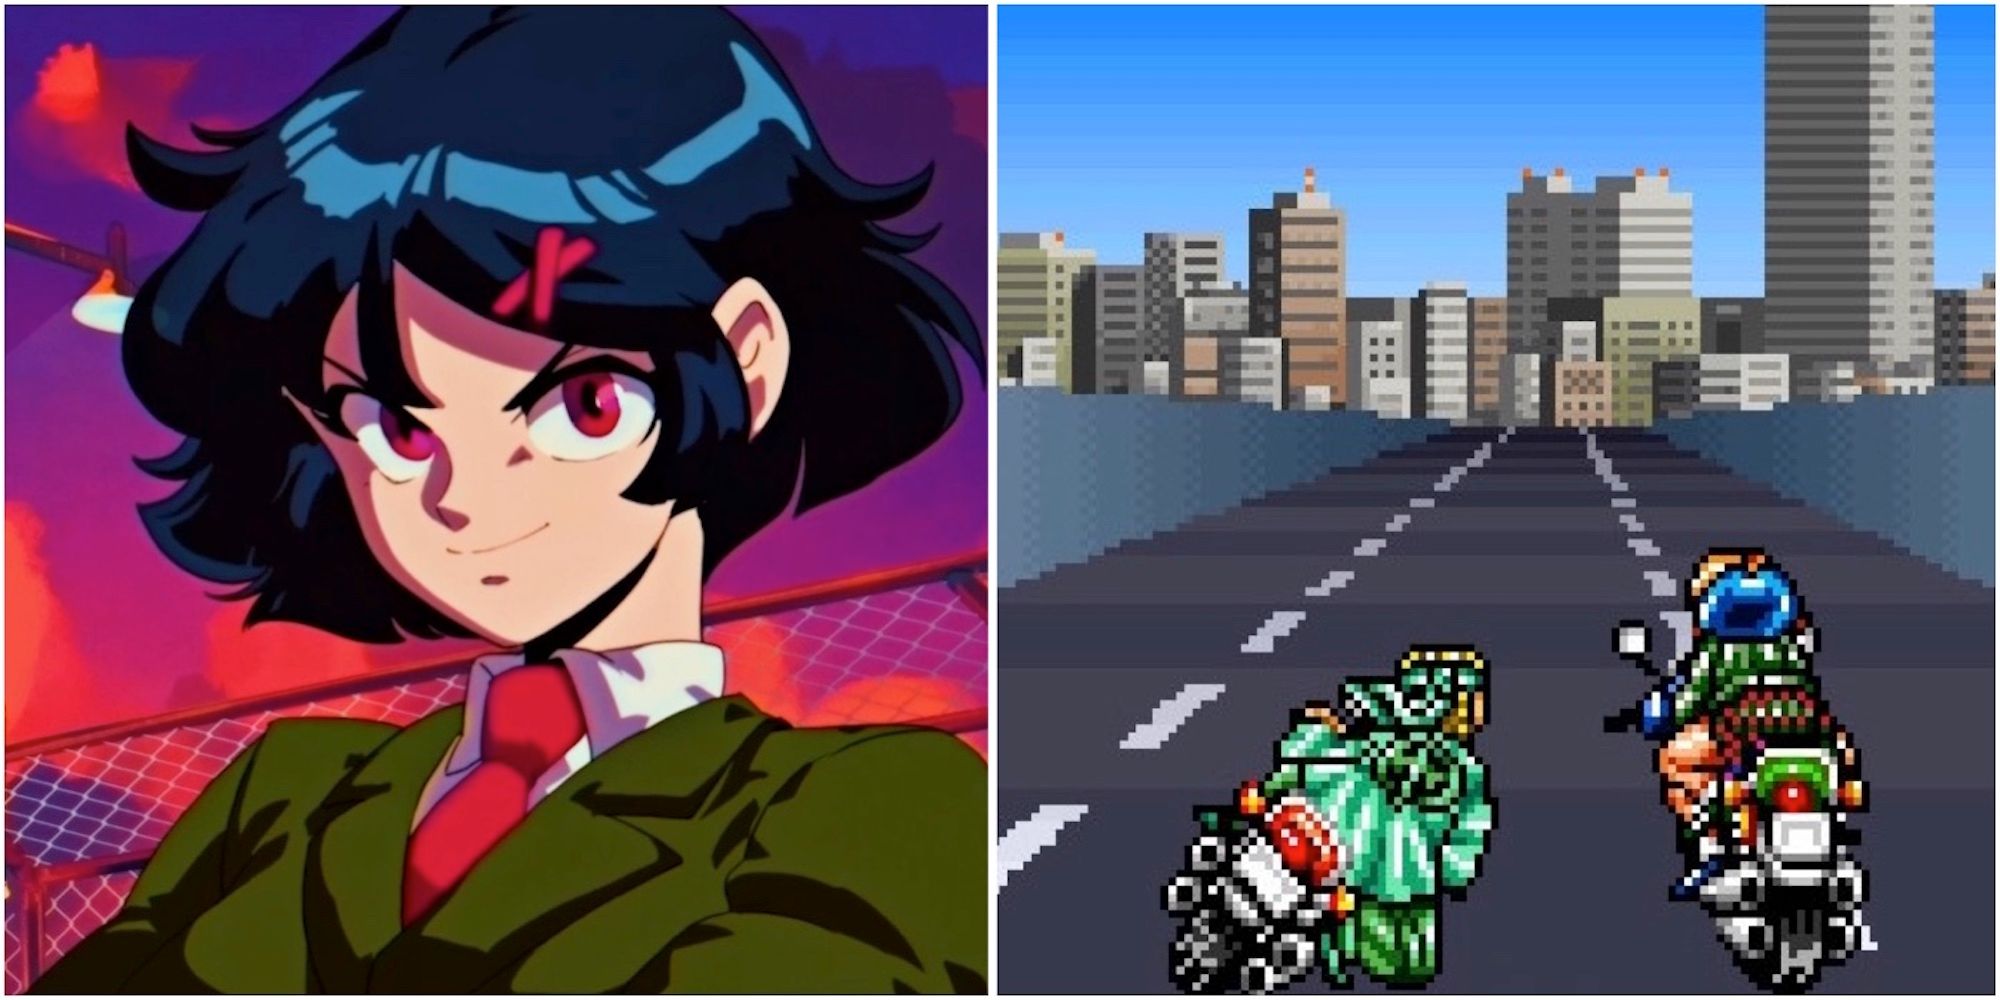 Misako and riding a motorcycle in co-op in River City Girls Zero